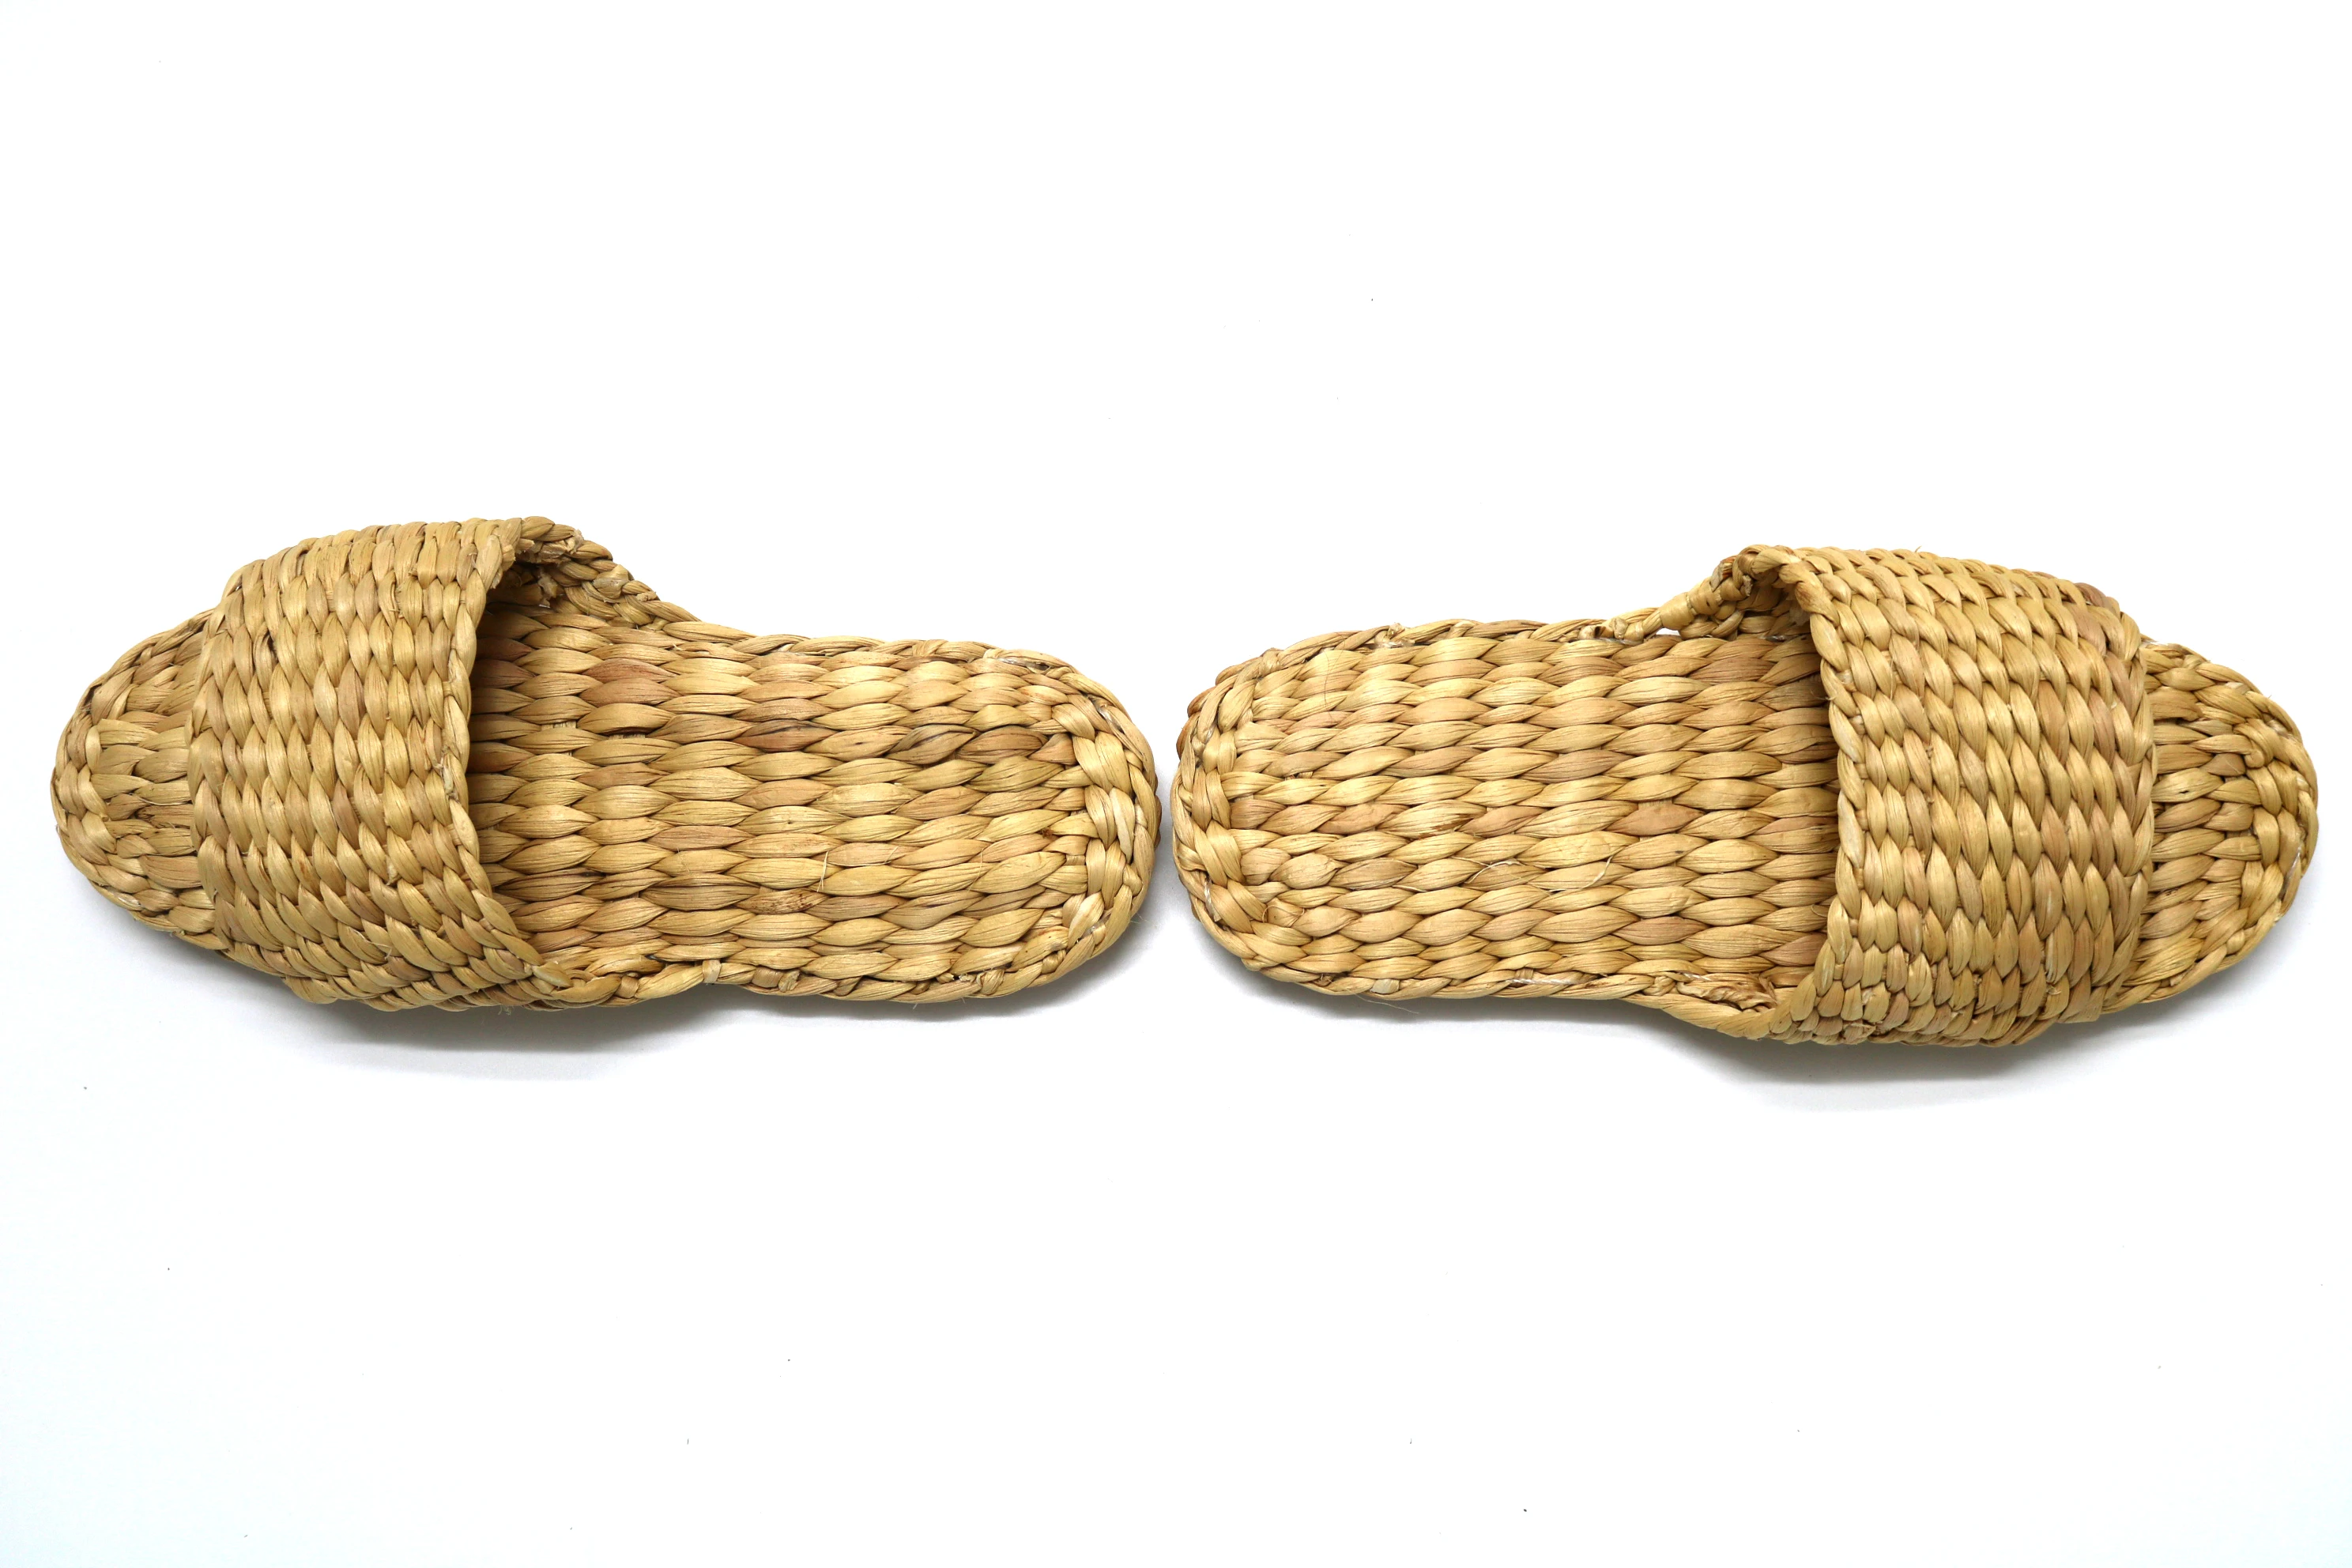 Hand Woven Hyacinth Water Slippers Opened Toes - Buy Women's Slippers ...